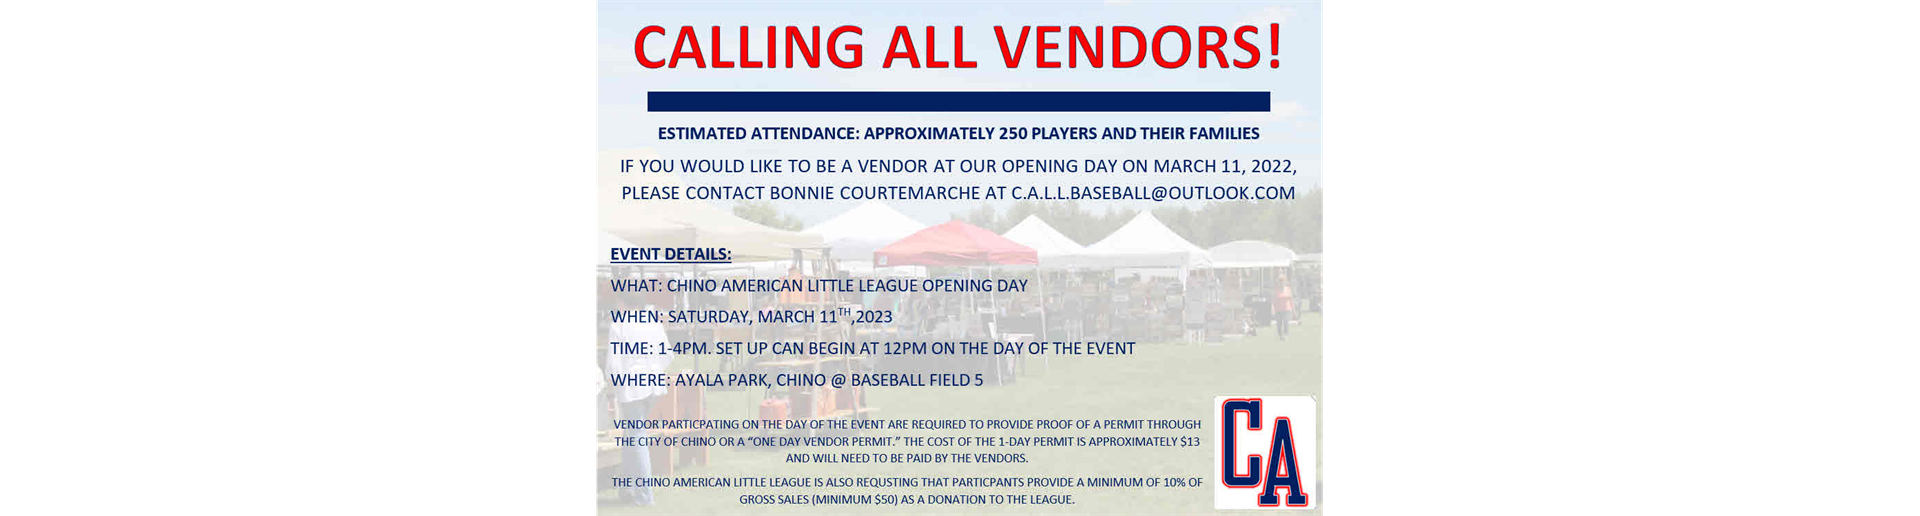 Vendors Wanted